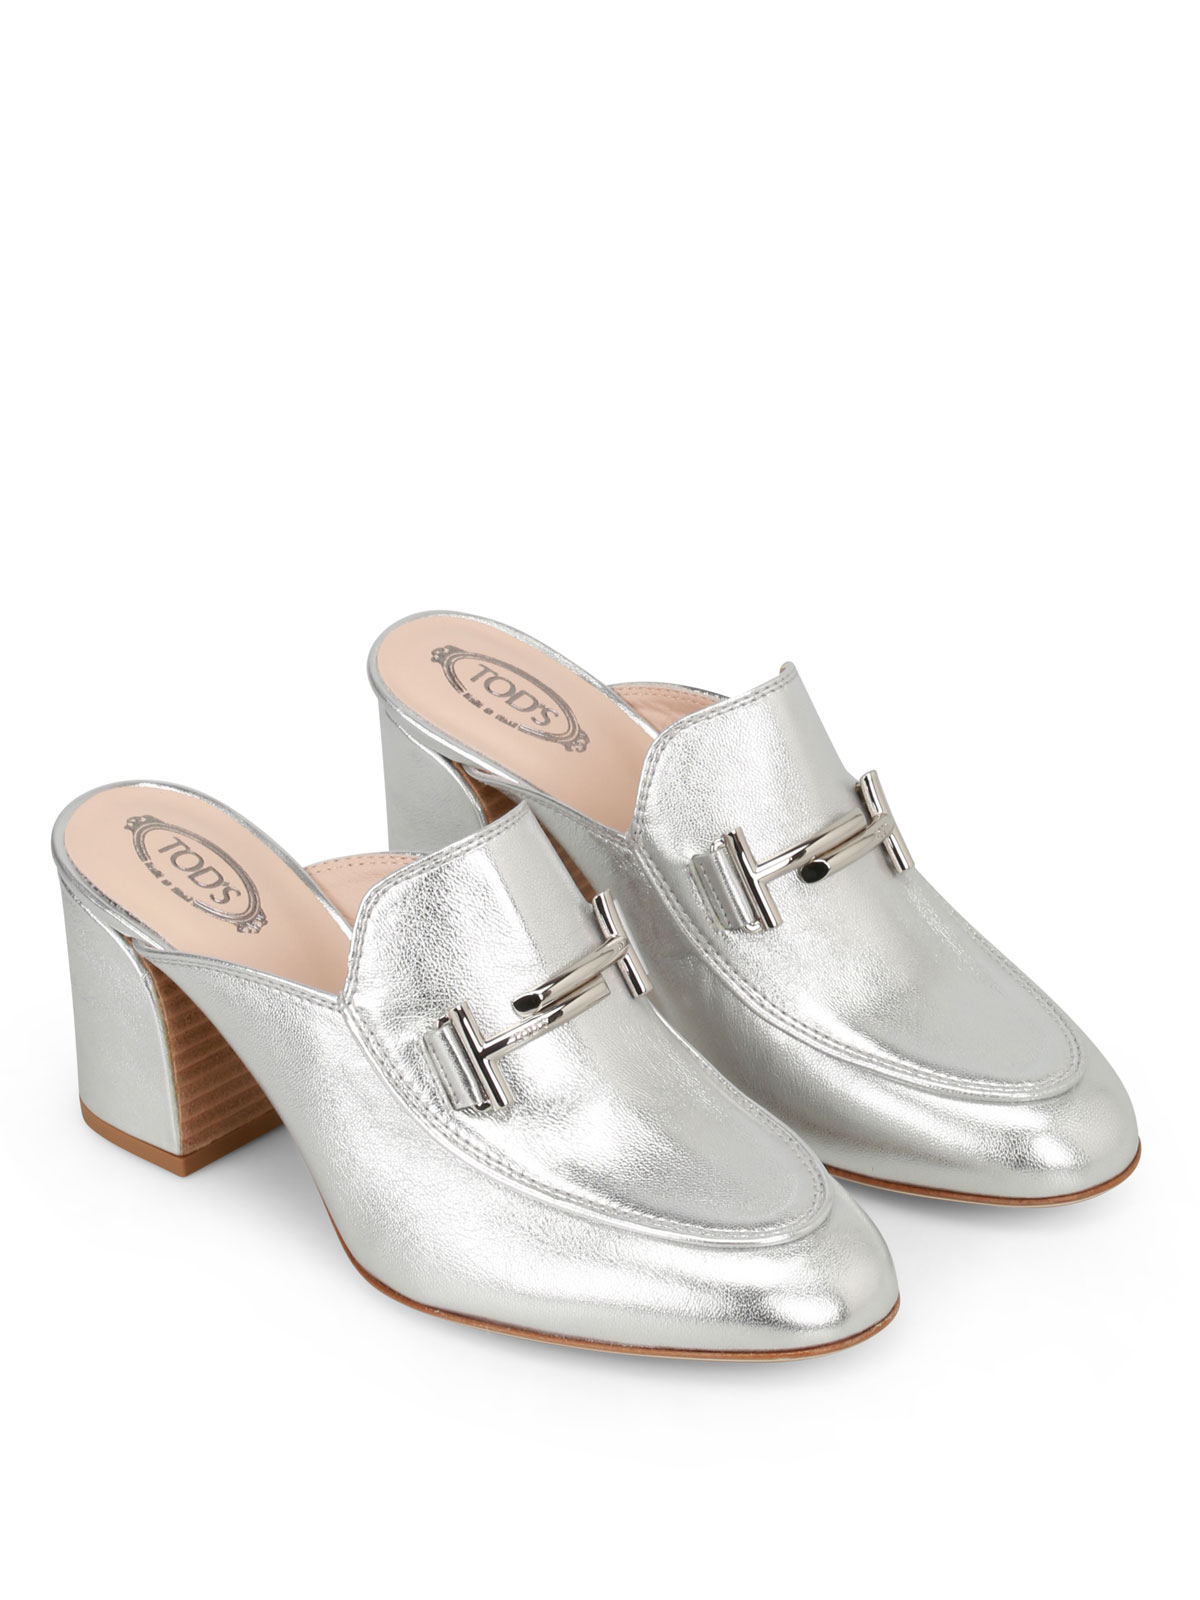 heeled silver mules - mules shoes 